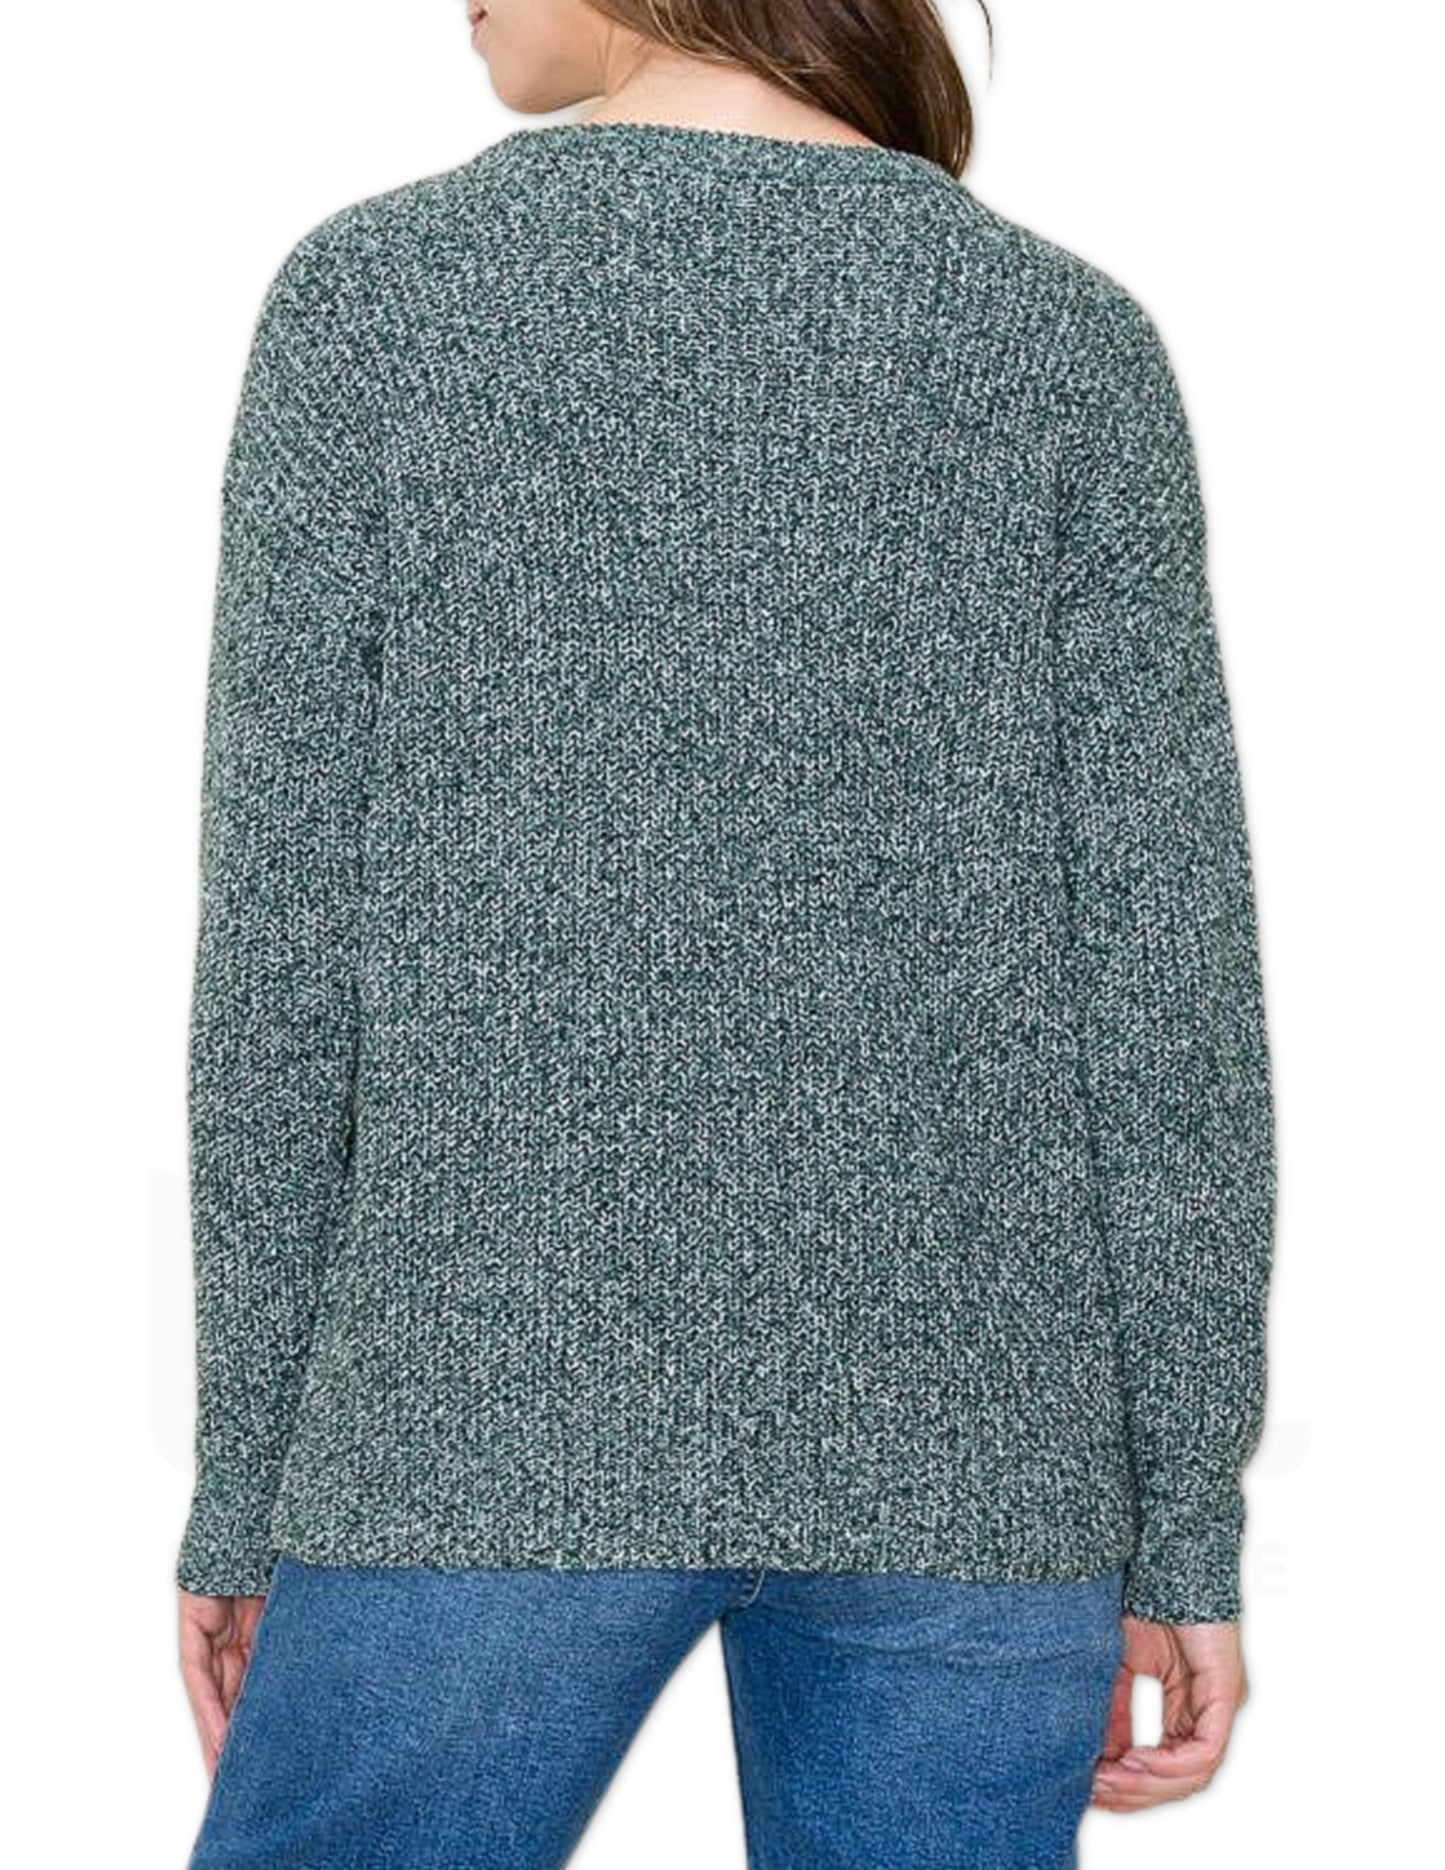 Comfy Crew Neck Sweater - Green